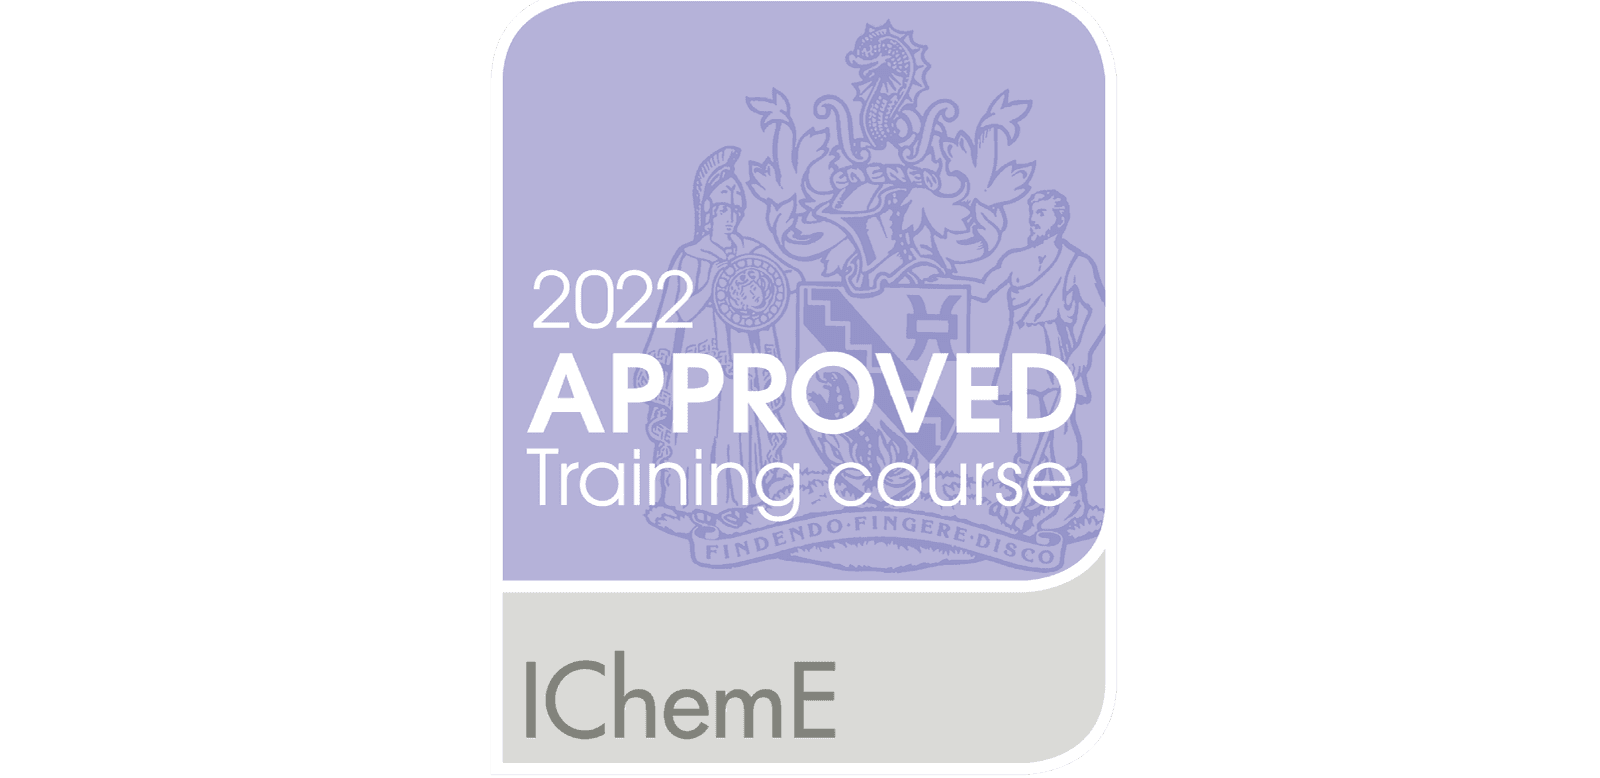 IChemE, 2021 approved training course